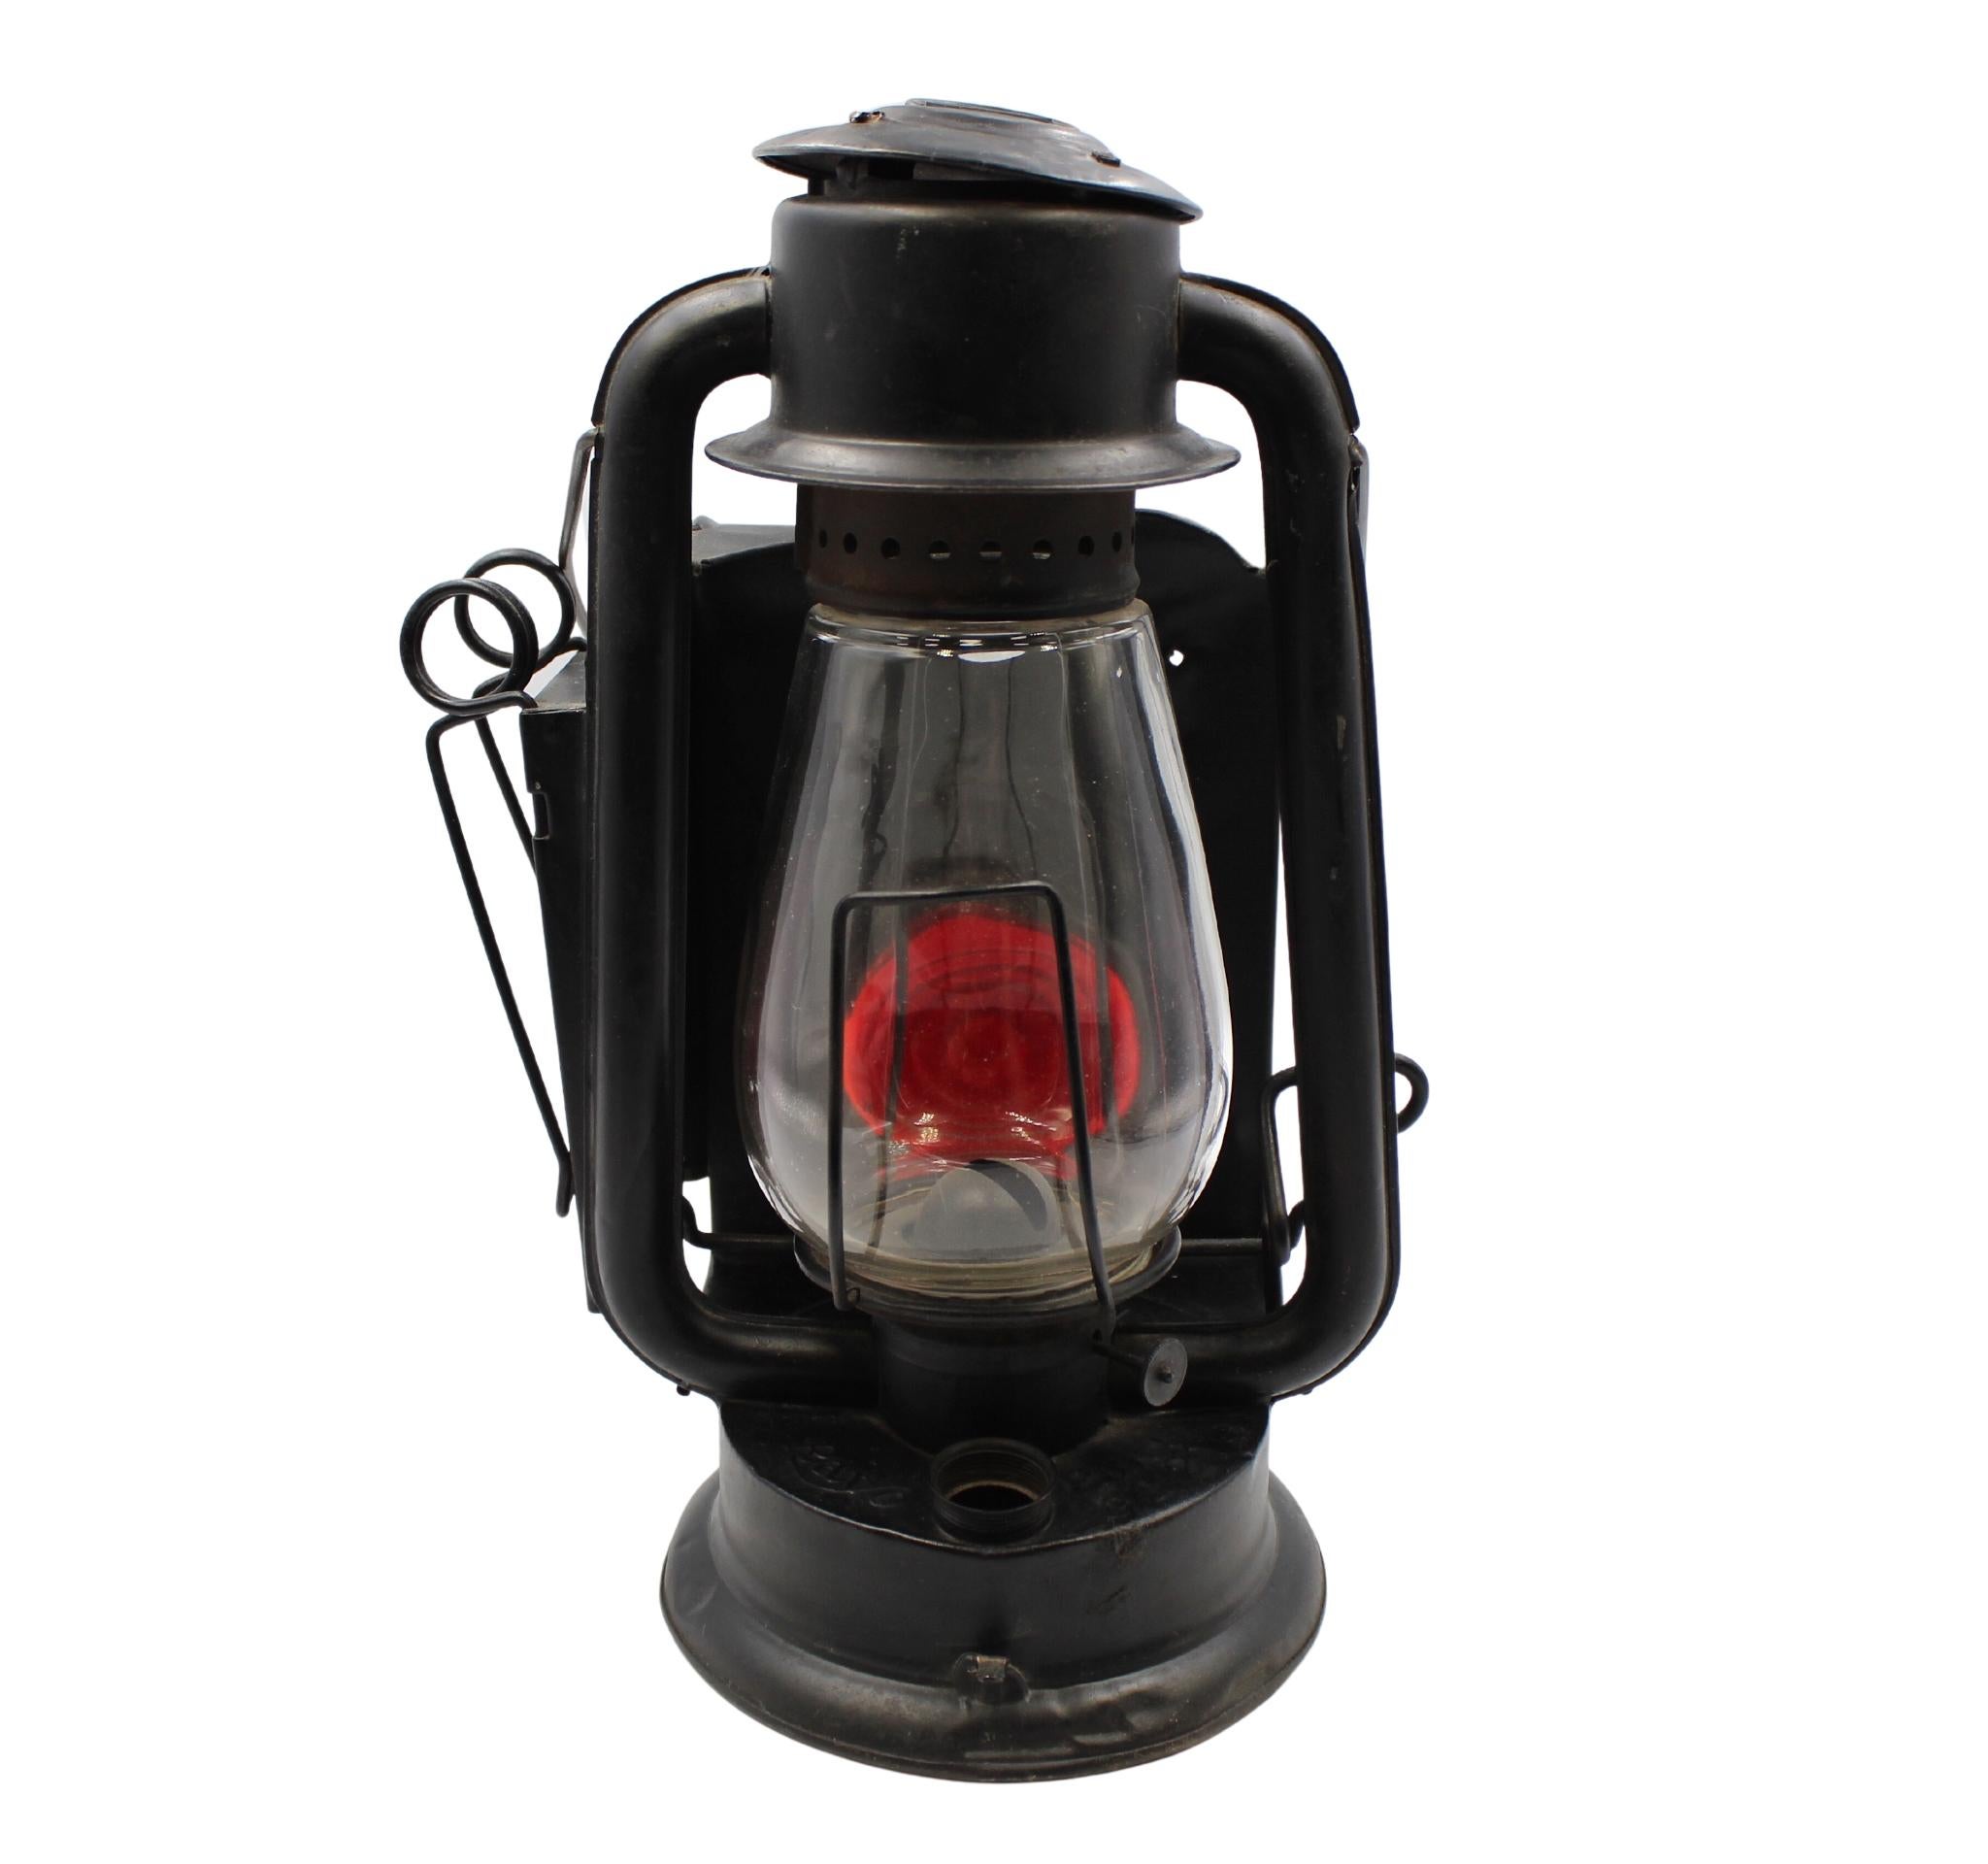 Presented is a vintage Rayo Pony No. 21 lantern, from the early 20th century. This metal and glass lantern was manufactured by Standard Oil for their Rayo line of lanterns and lamps. Burning kerosene as fuel, this lamp would have been clamped to the